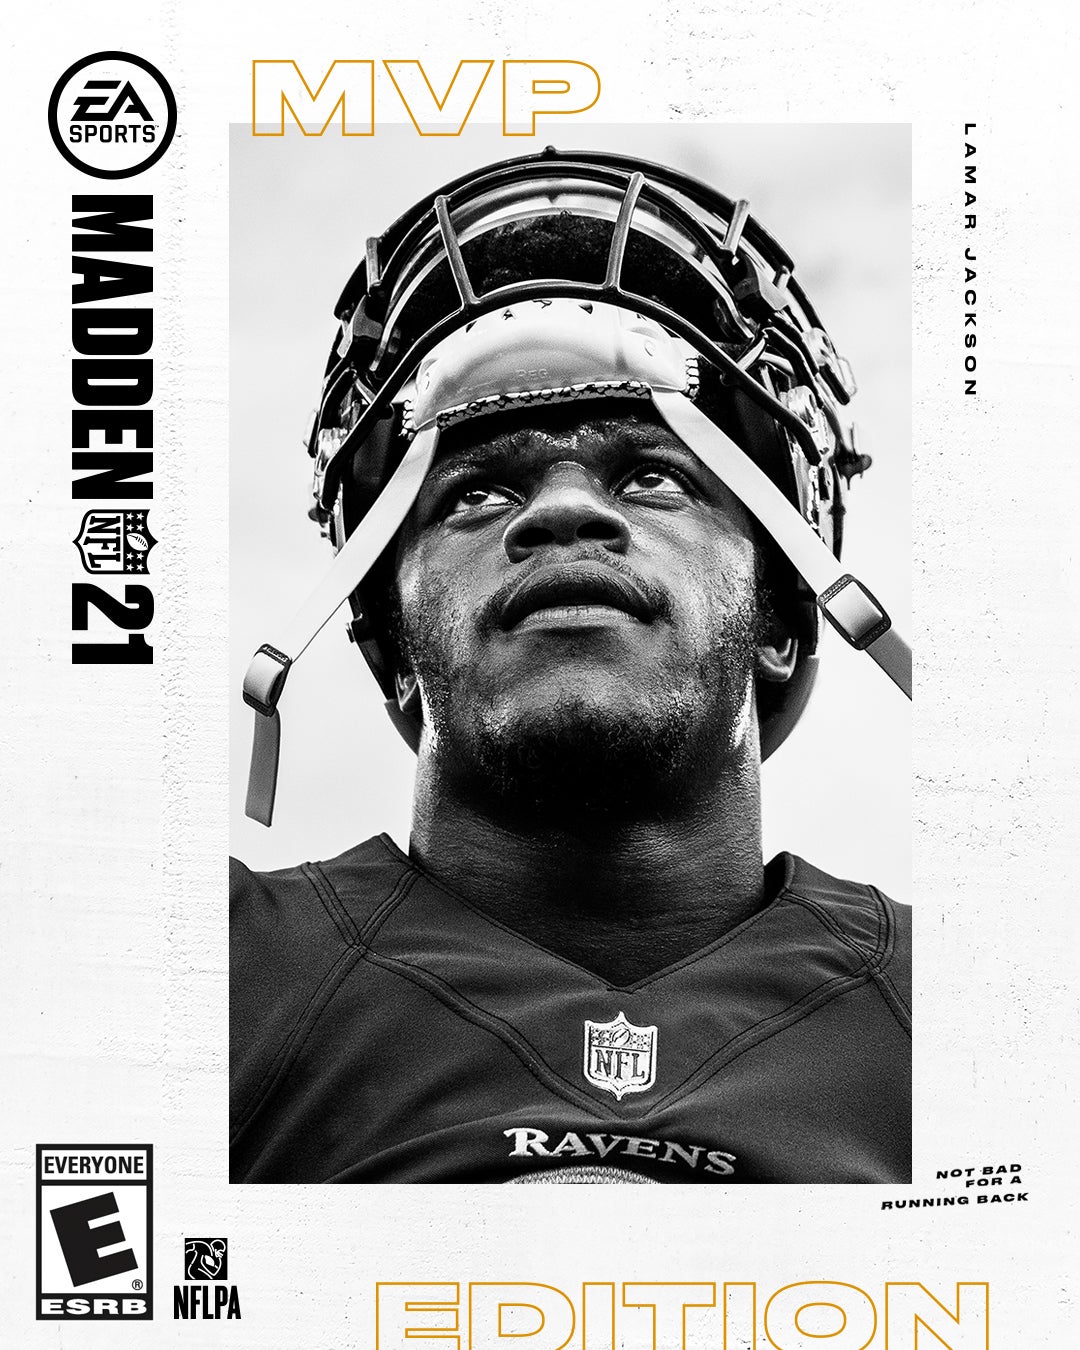 Image for Madden 21 free upgrade confirmed for PS5, game is also coming to Steam